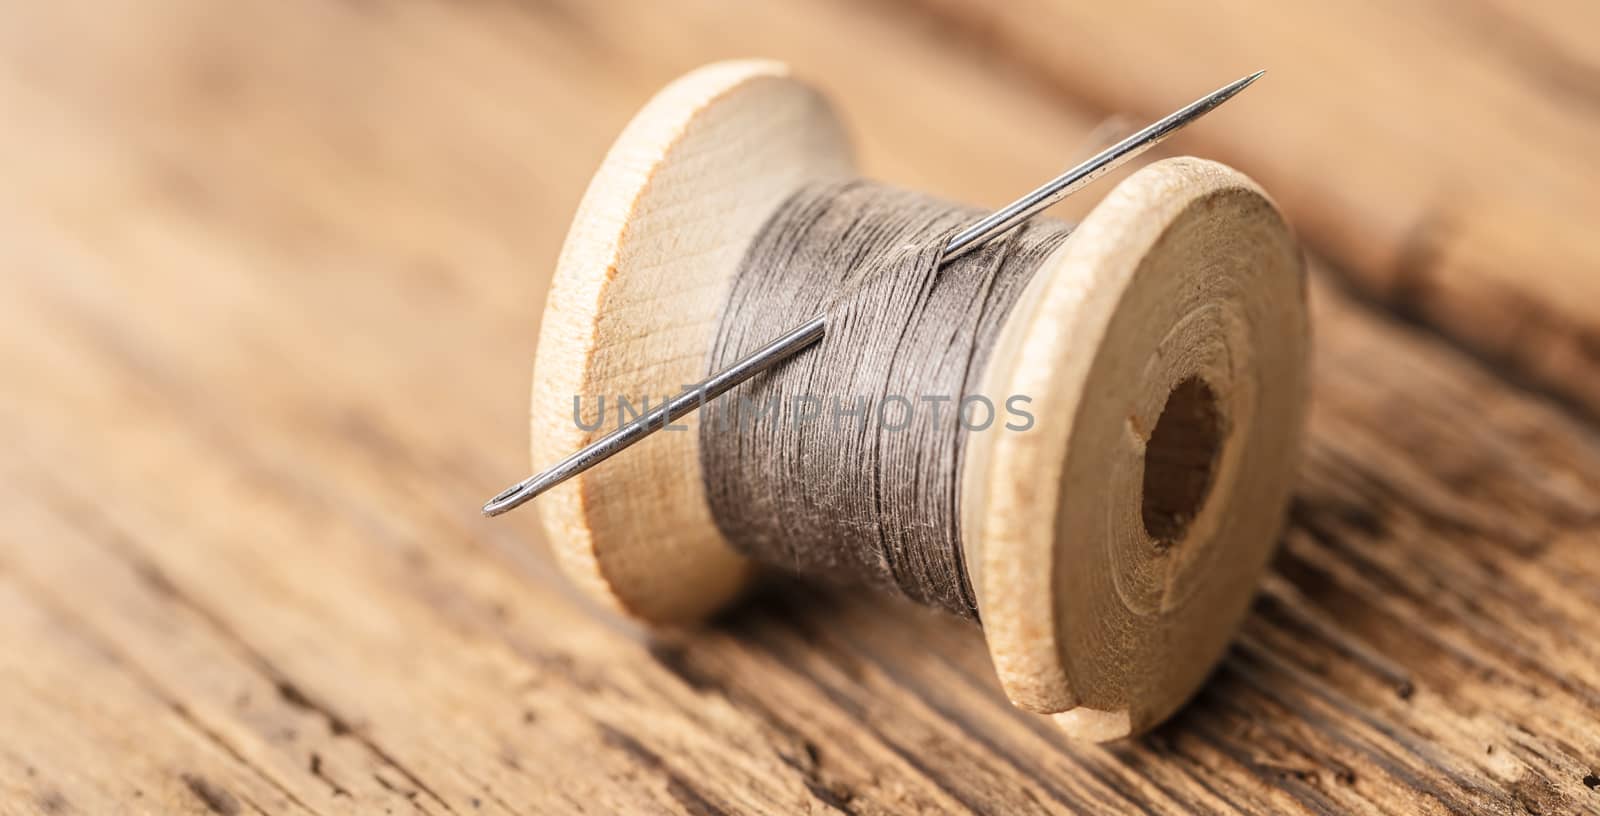 spool of thread with a needle on wooden background